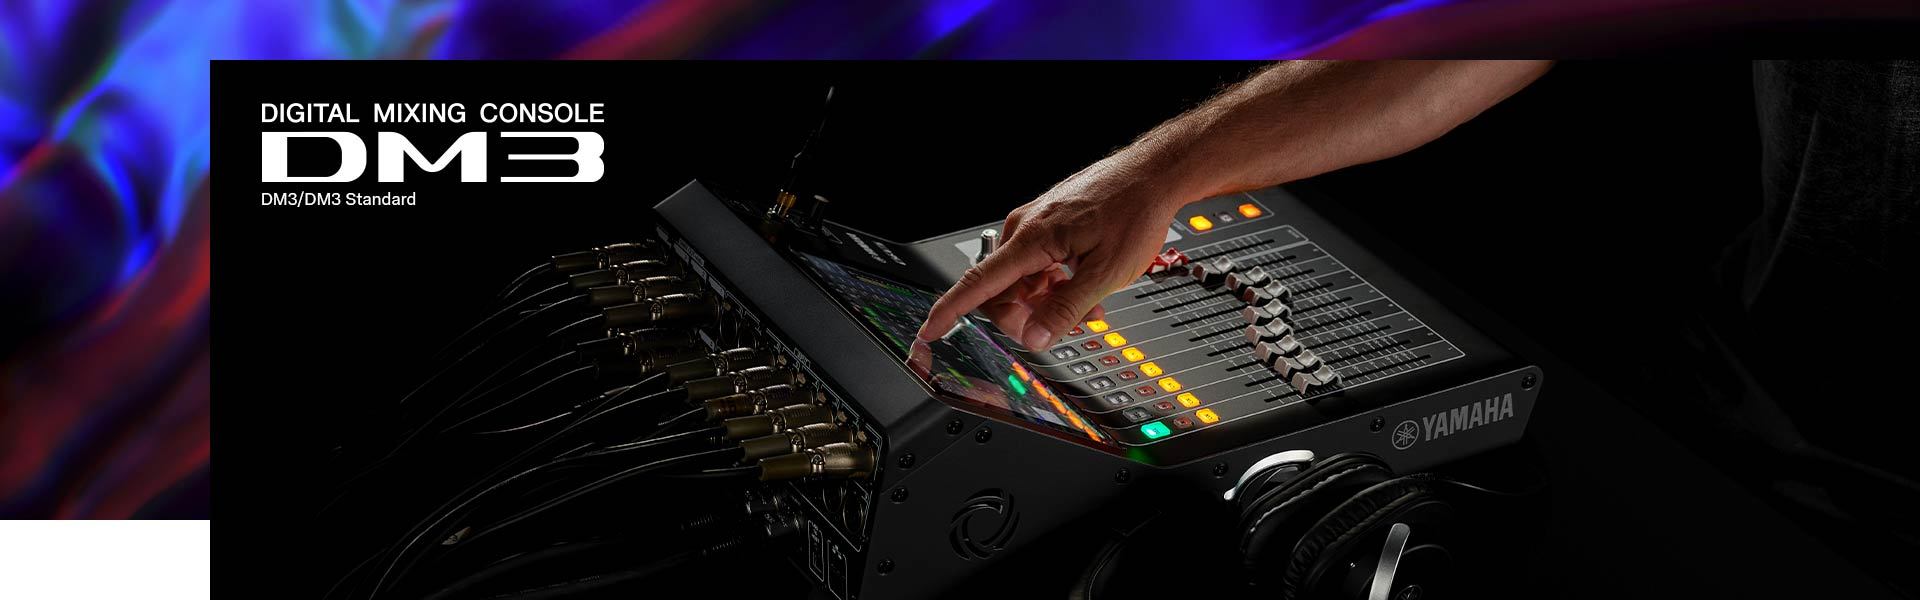 DM3 Series - Features - Mixers - Professional Audio - Products 